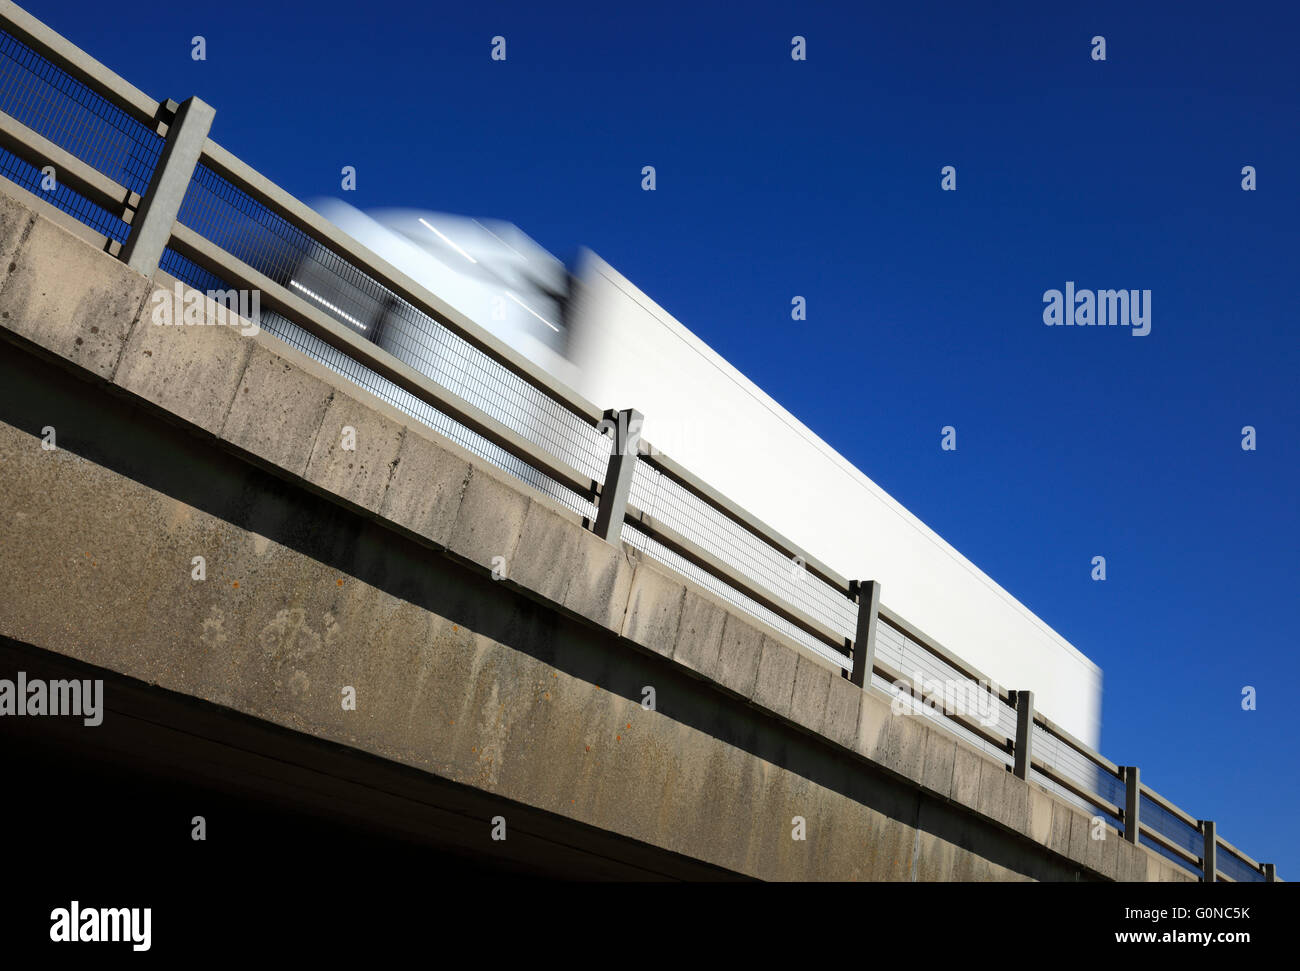 Heavy goods vehicle passing above on a flyover against a blue sky. Stock Photo